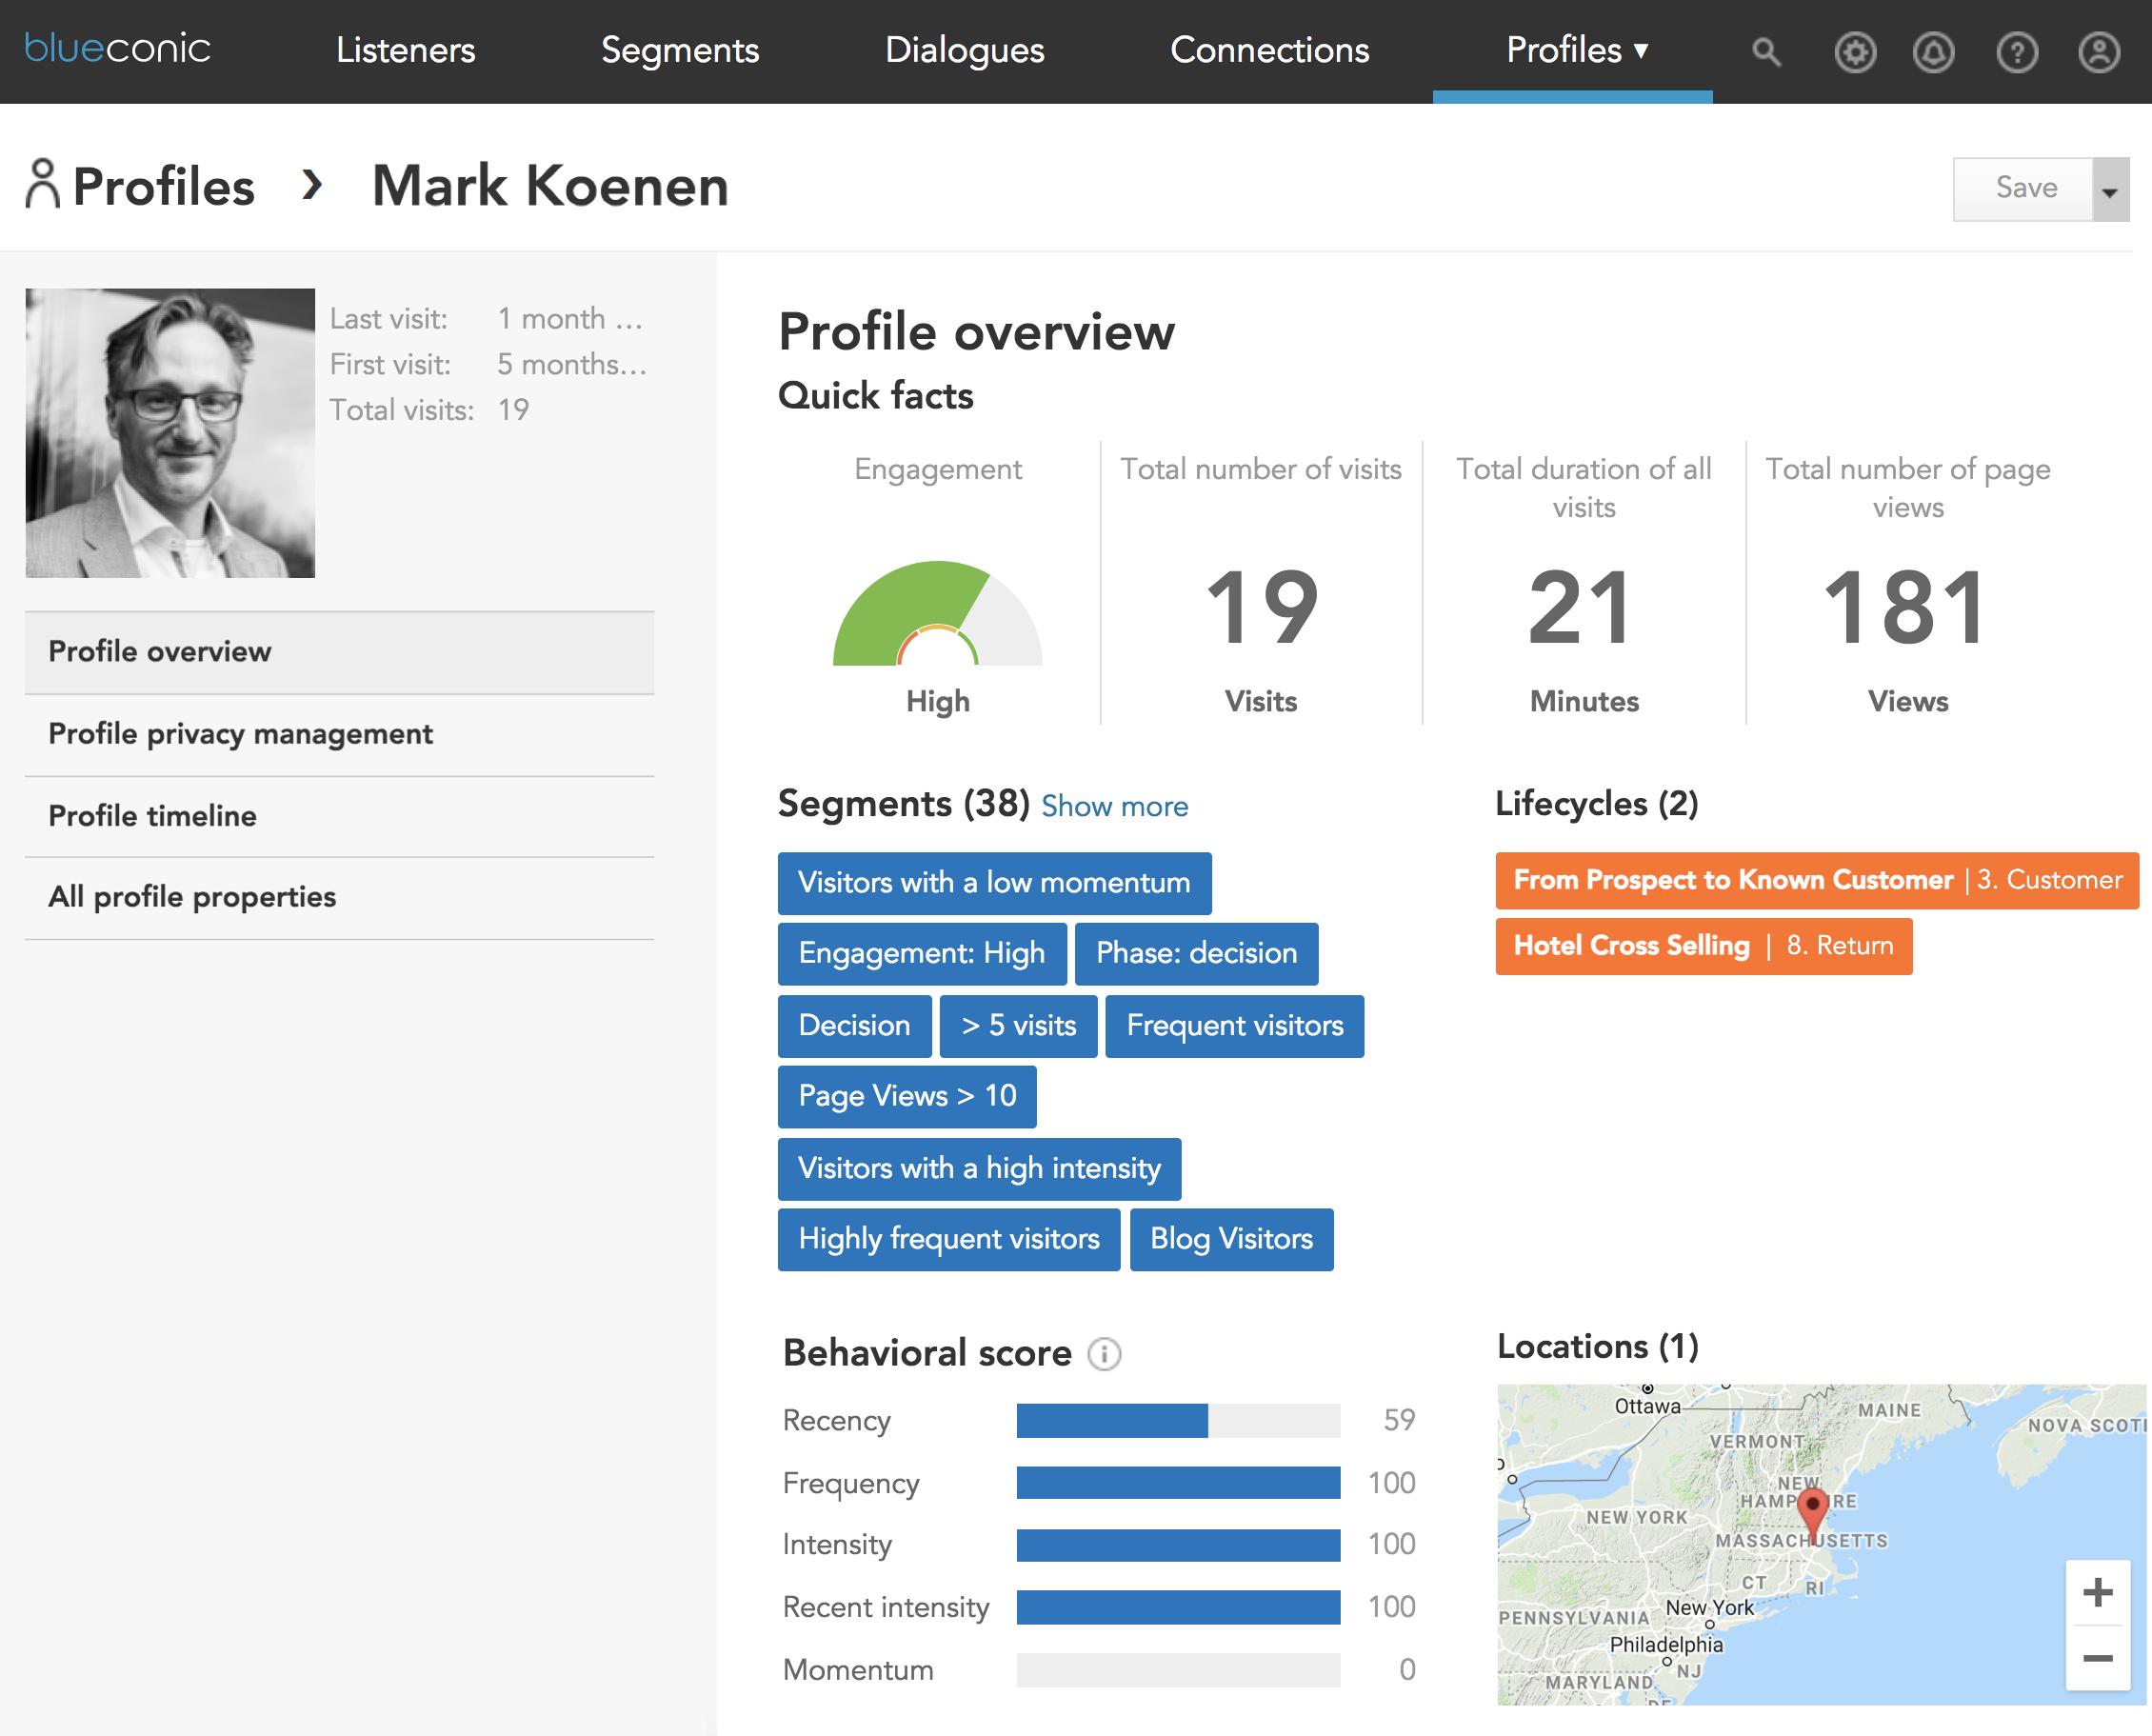 How to see which customer journeys a profile is part of in the BlueConic marketing CDP